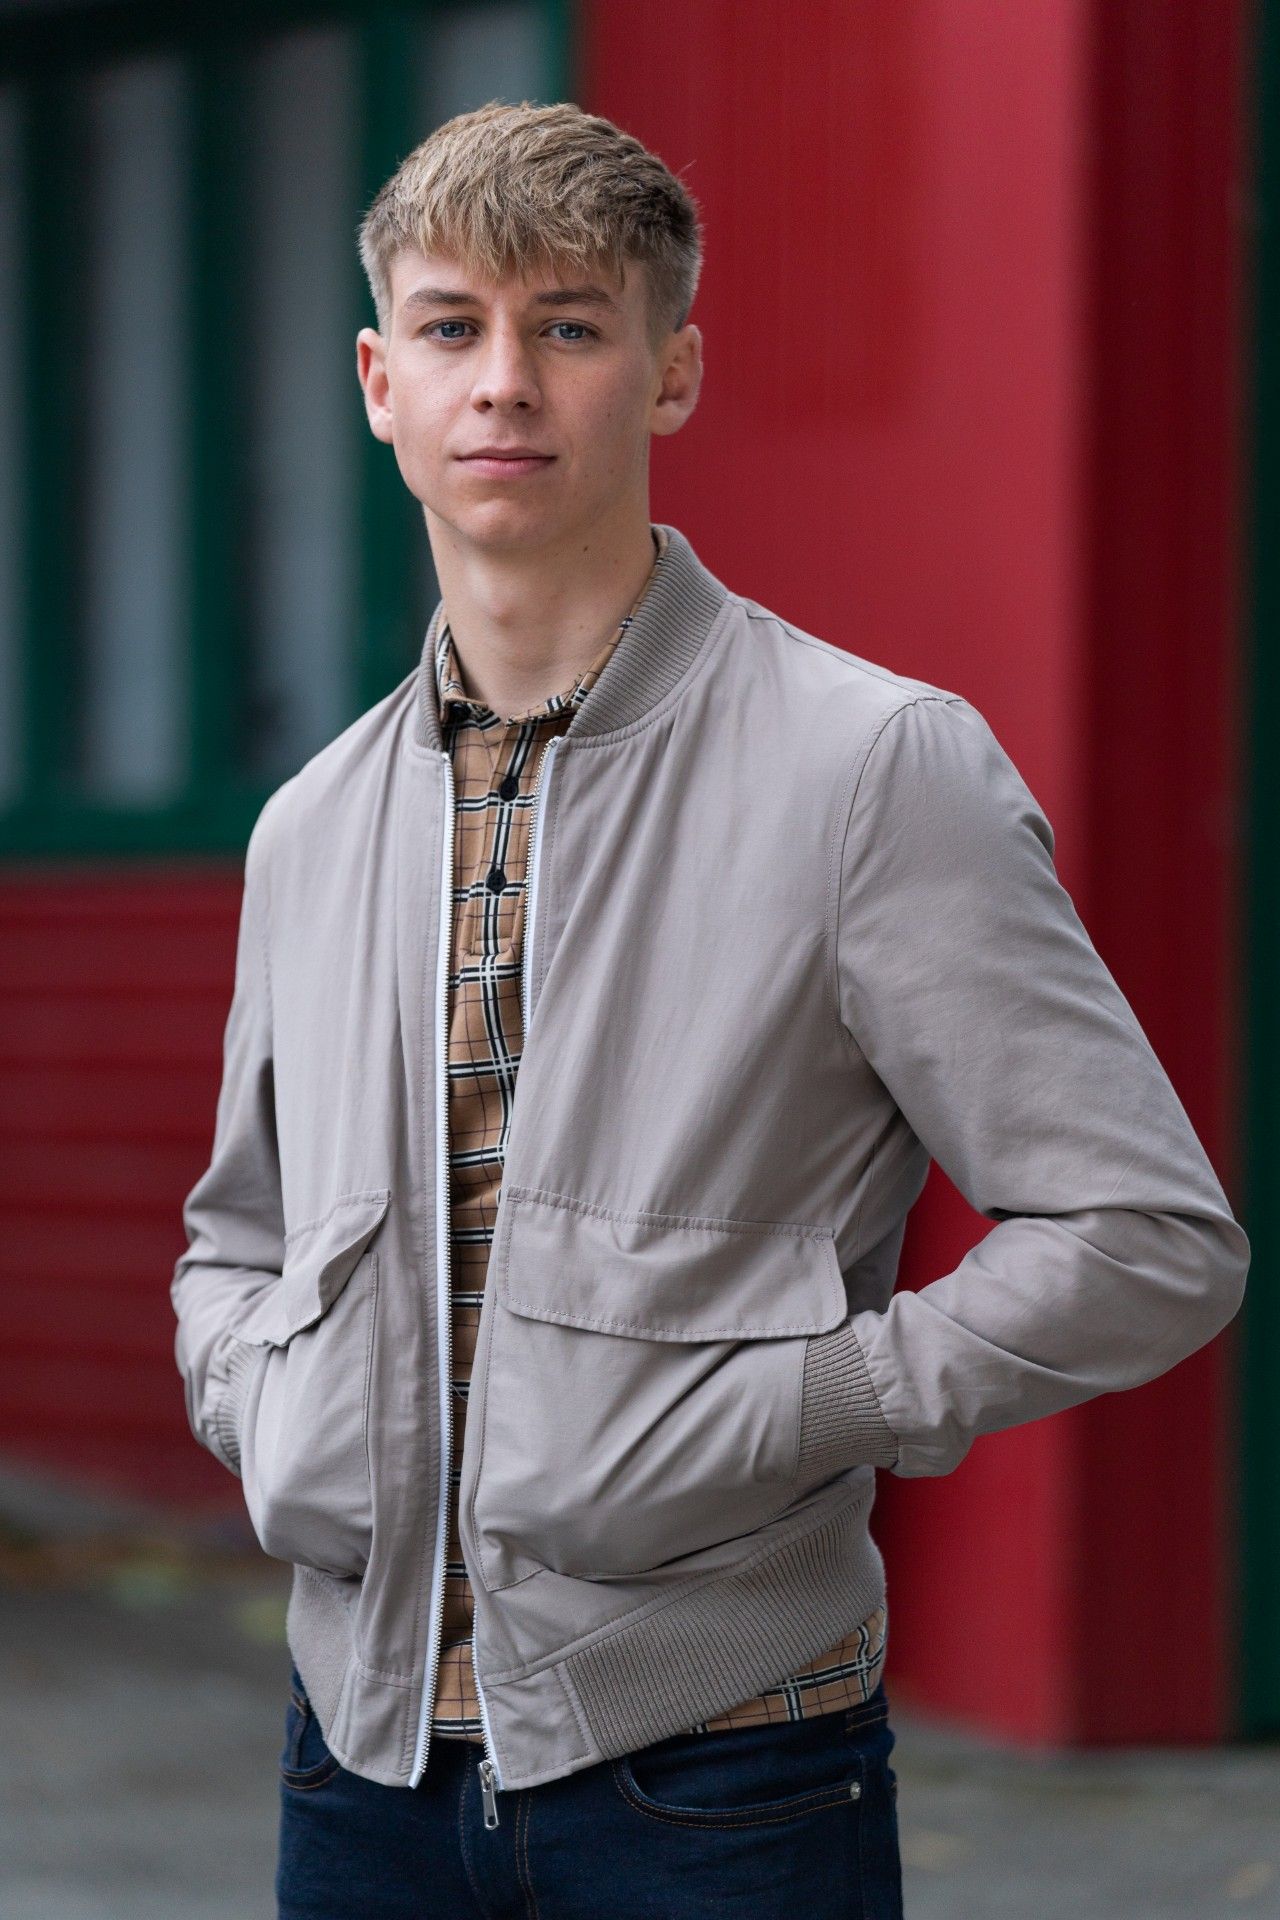 Inside Hollyoaks star Billy Price’s life off-screen – from EastEnders snub to Nickelodeon child fame